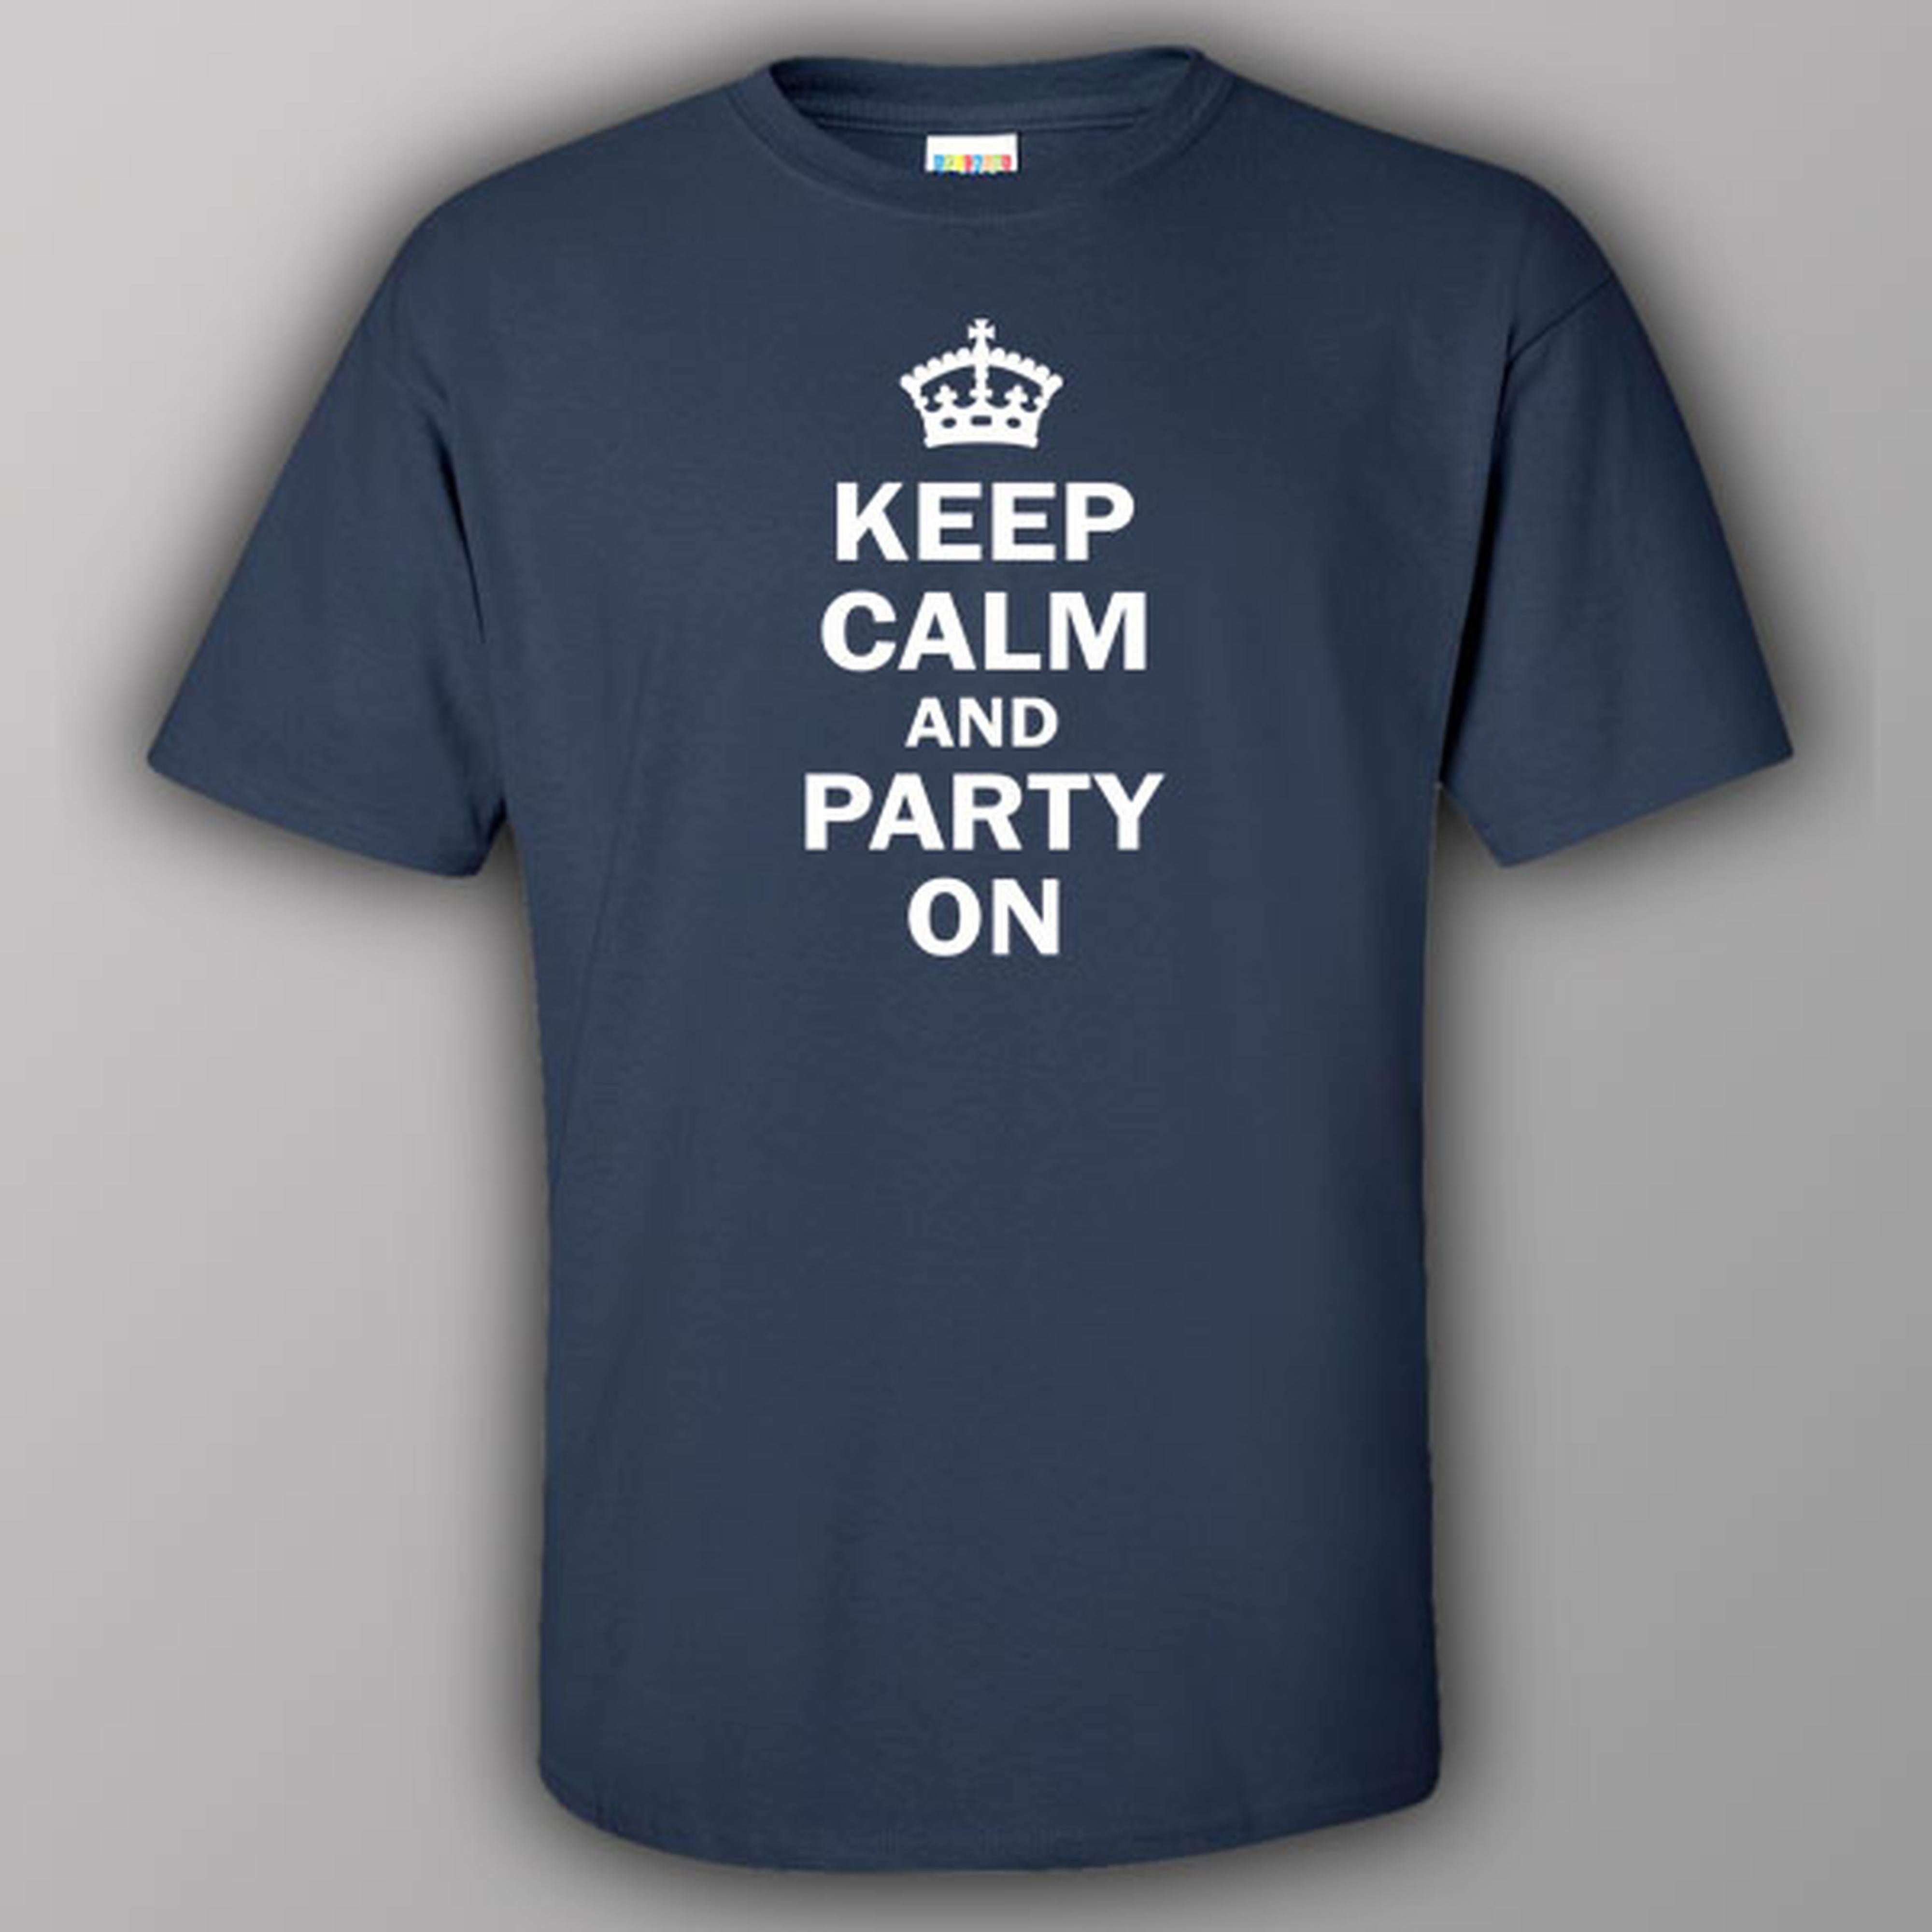 keep-calm-and-party-on-t-shirt